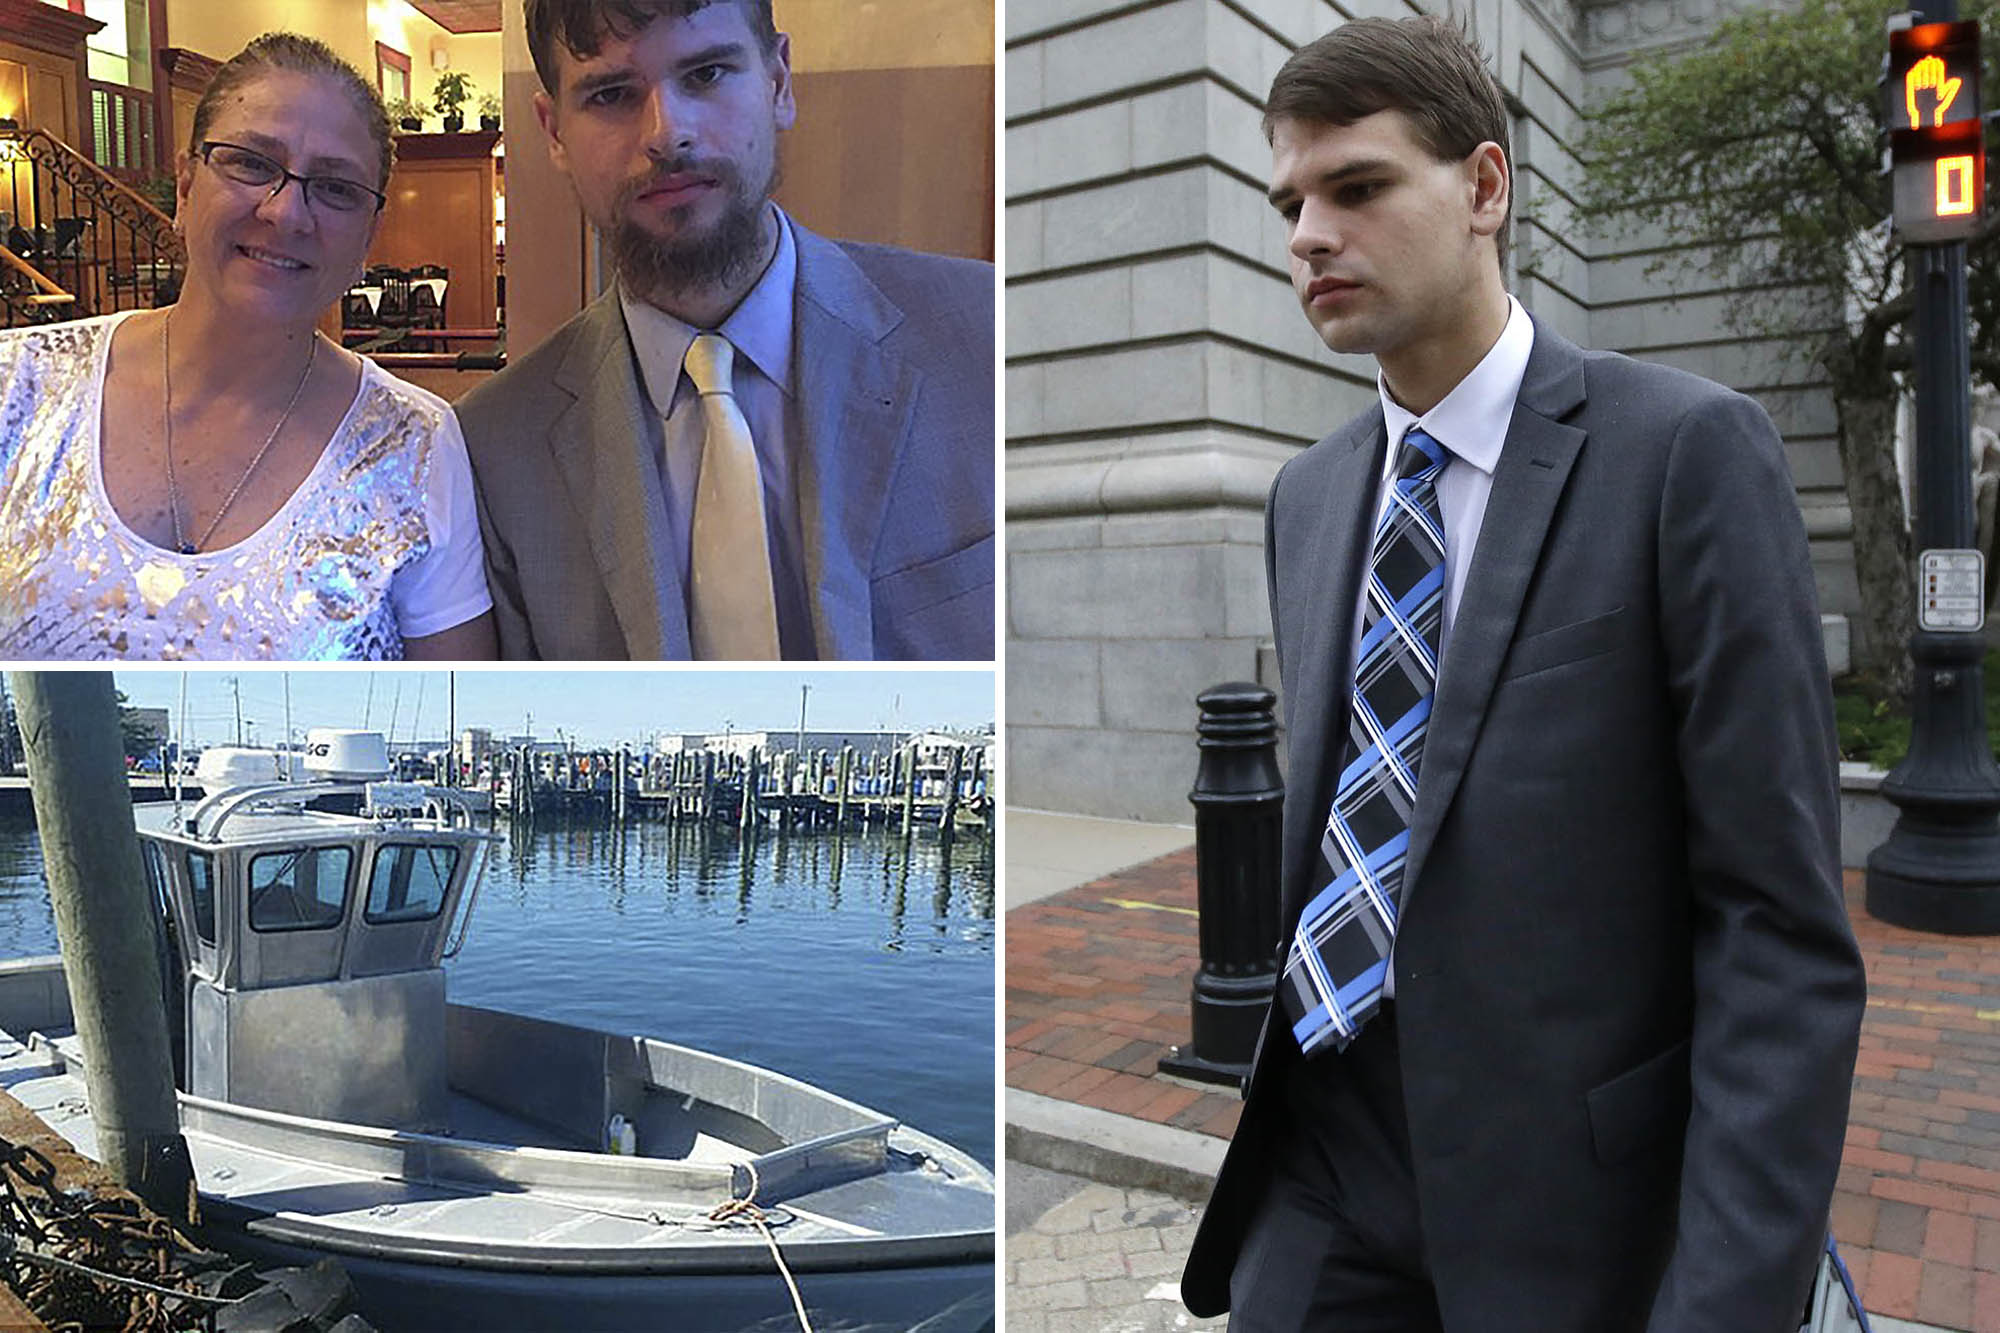 Nathan Carman departs federal court in Providence, R.I., Wednesday, Aug. 21, 2019. He is charged with killing his mother during a fishing trip in 2016.